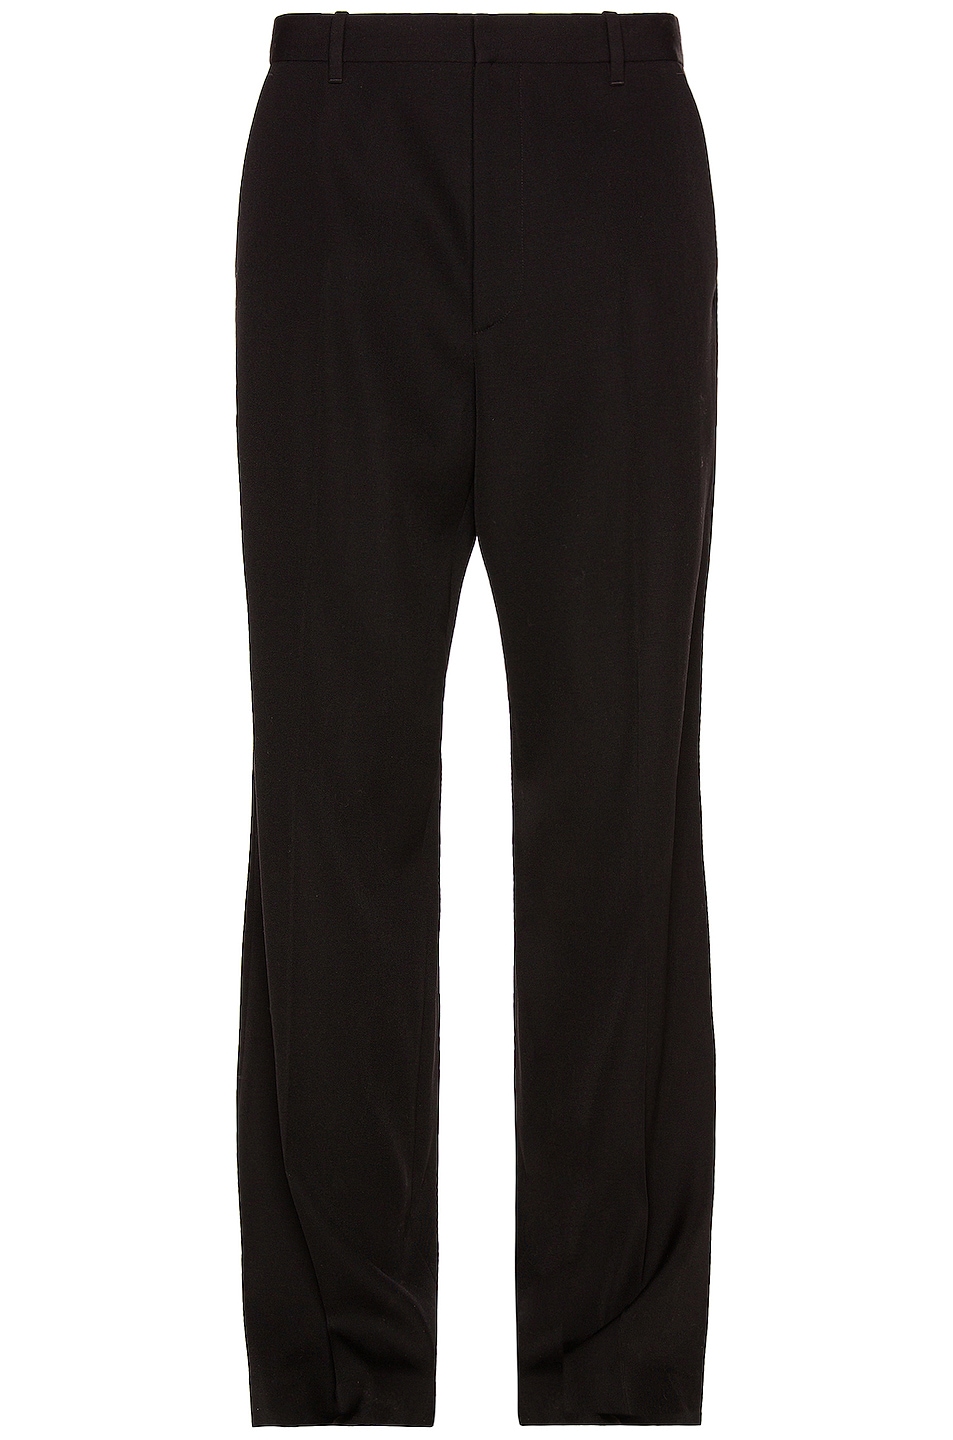 Image 1 of The Row Jude Pant in Black